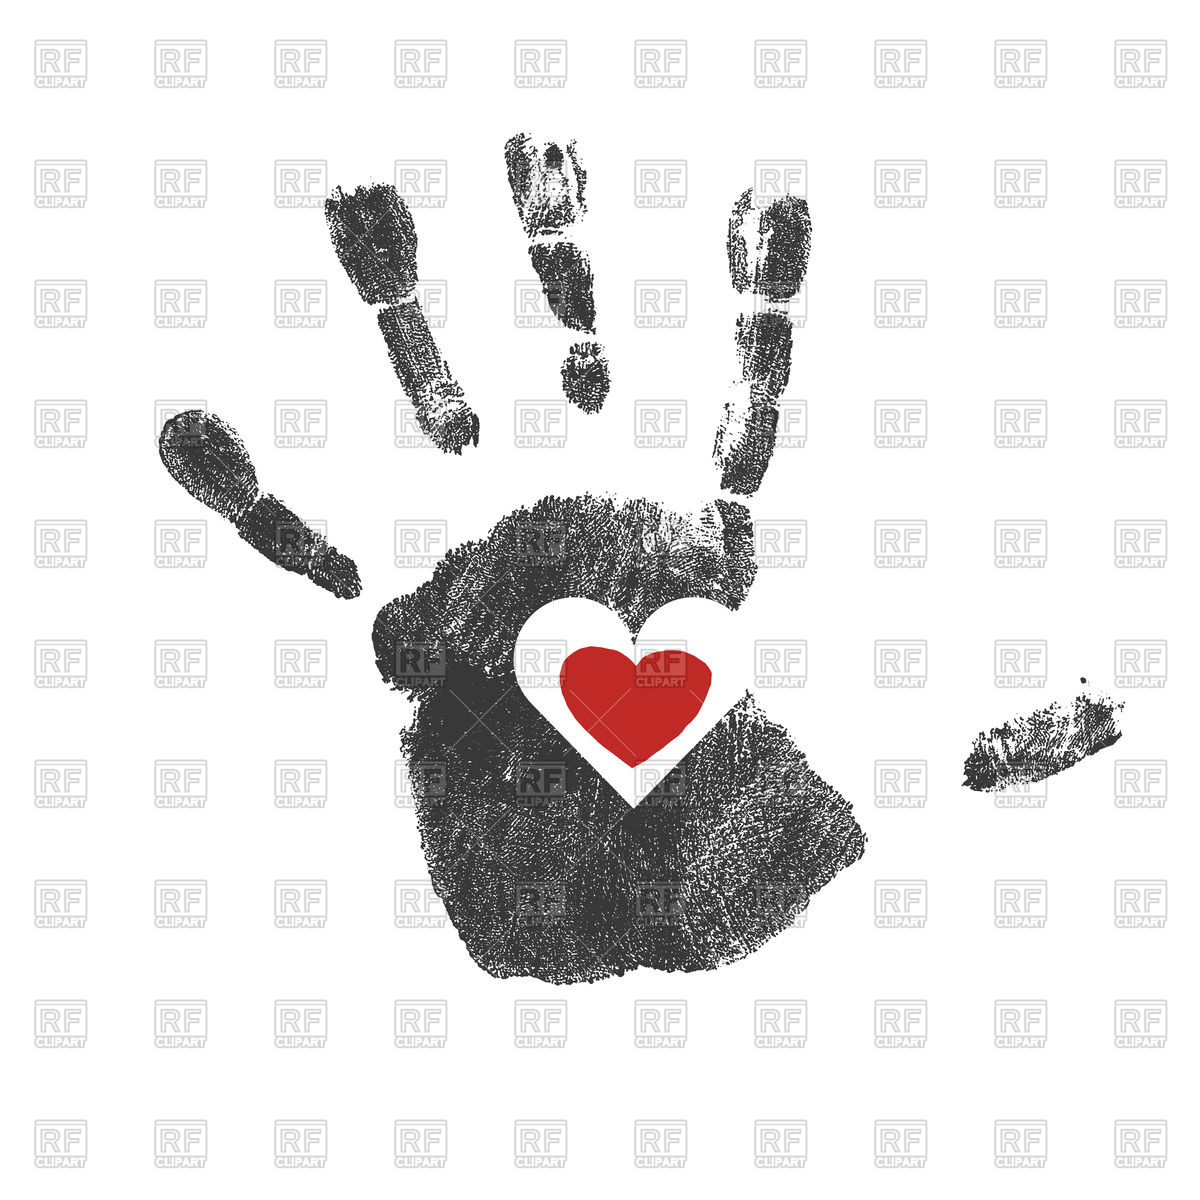 Handprint With Red Heart Inside Download Royalty Free Vector Clipart